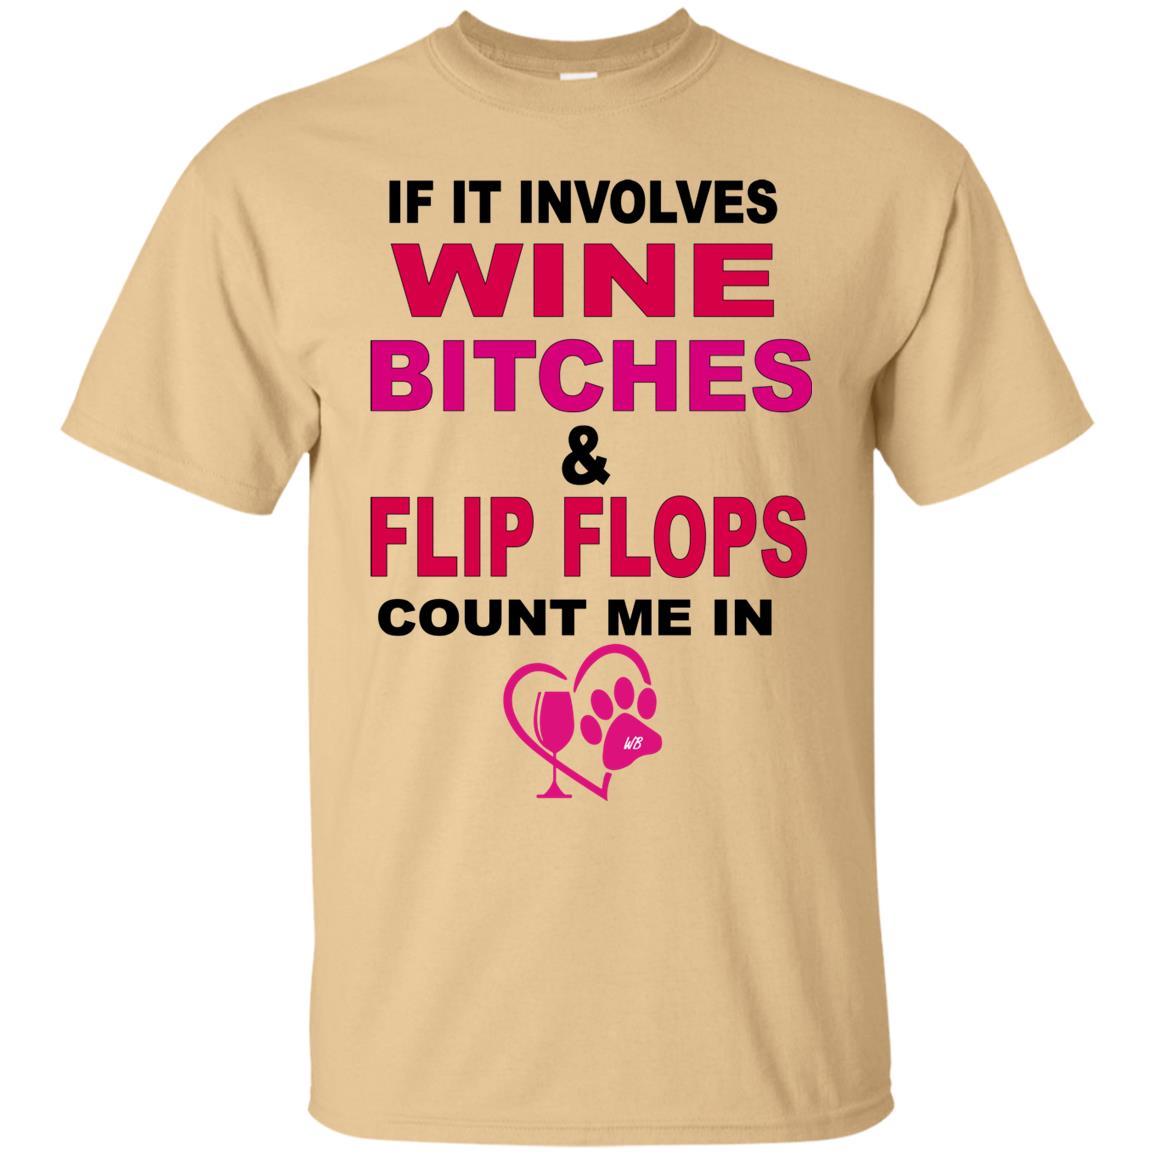 T-Shirts Vegas Gold / S WineyBitches.co " If It Involves Wine Bitches & Flip Flops I'm In" Ultra Cotton Unisex T-Shirt WineyBitches.co Hilariously Funny T-Shirt for Wine & Dog Lovers   WineyBitchesCo